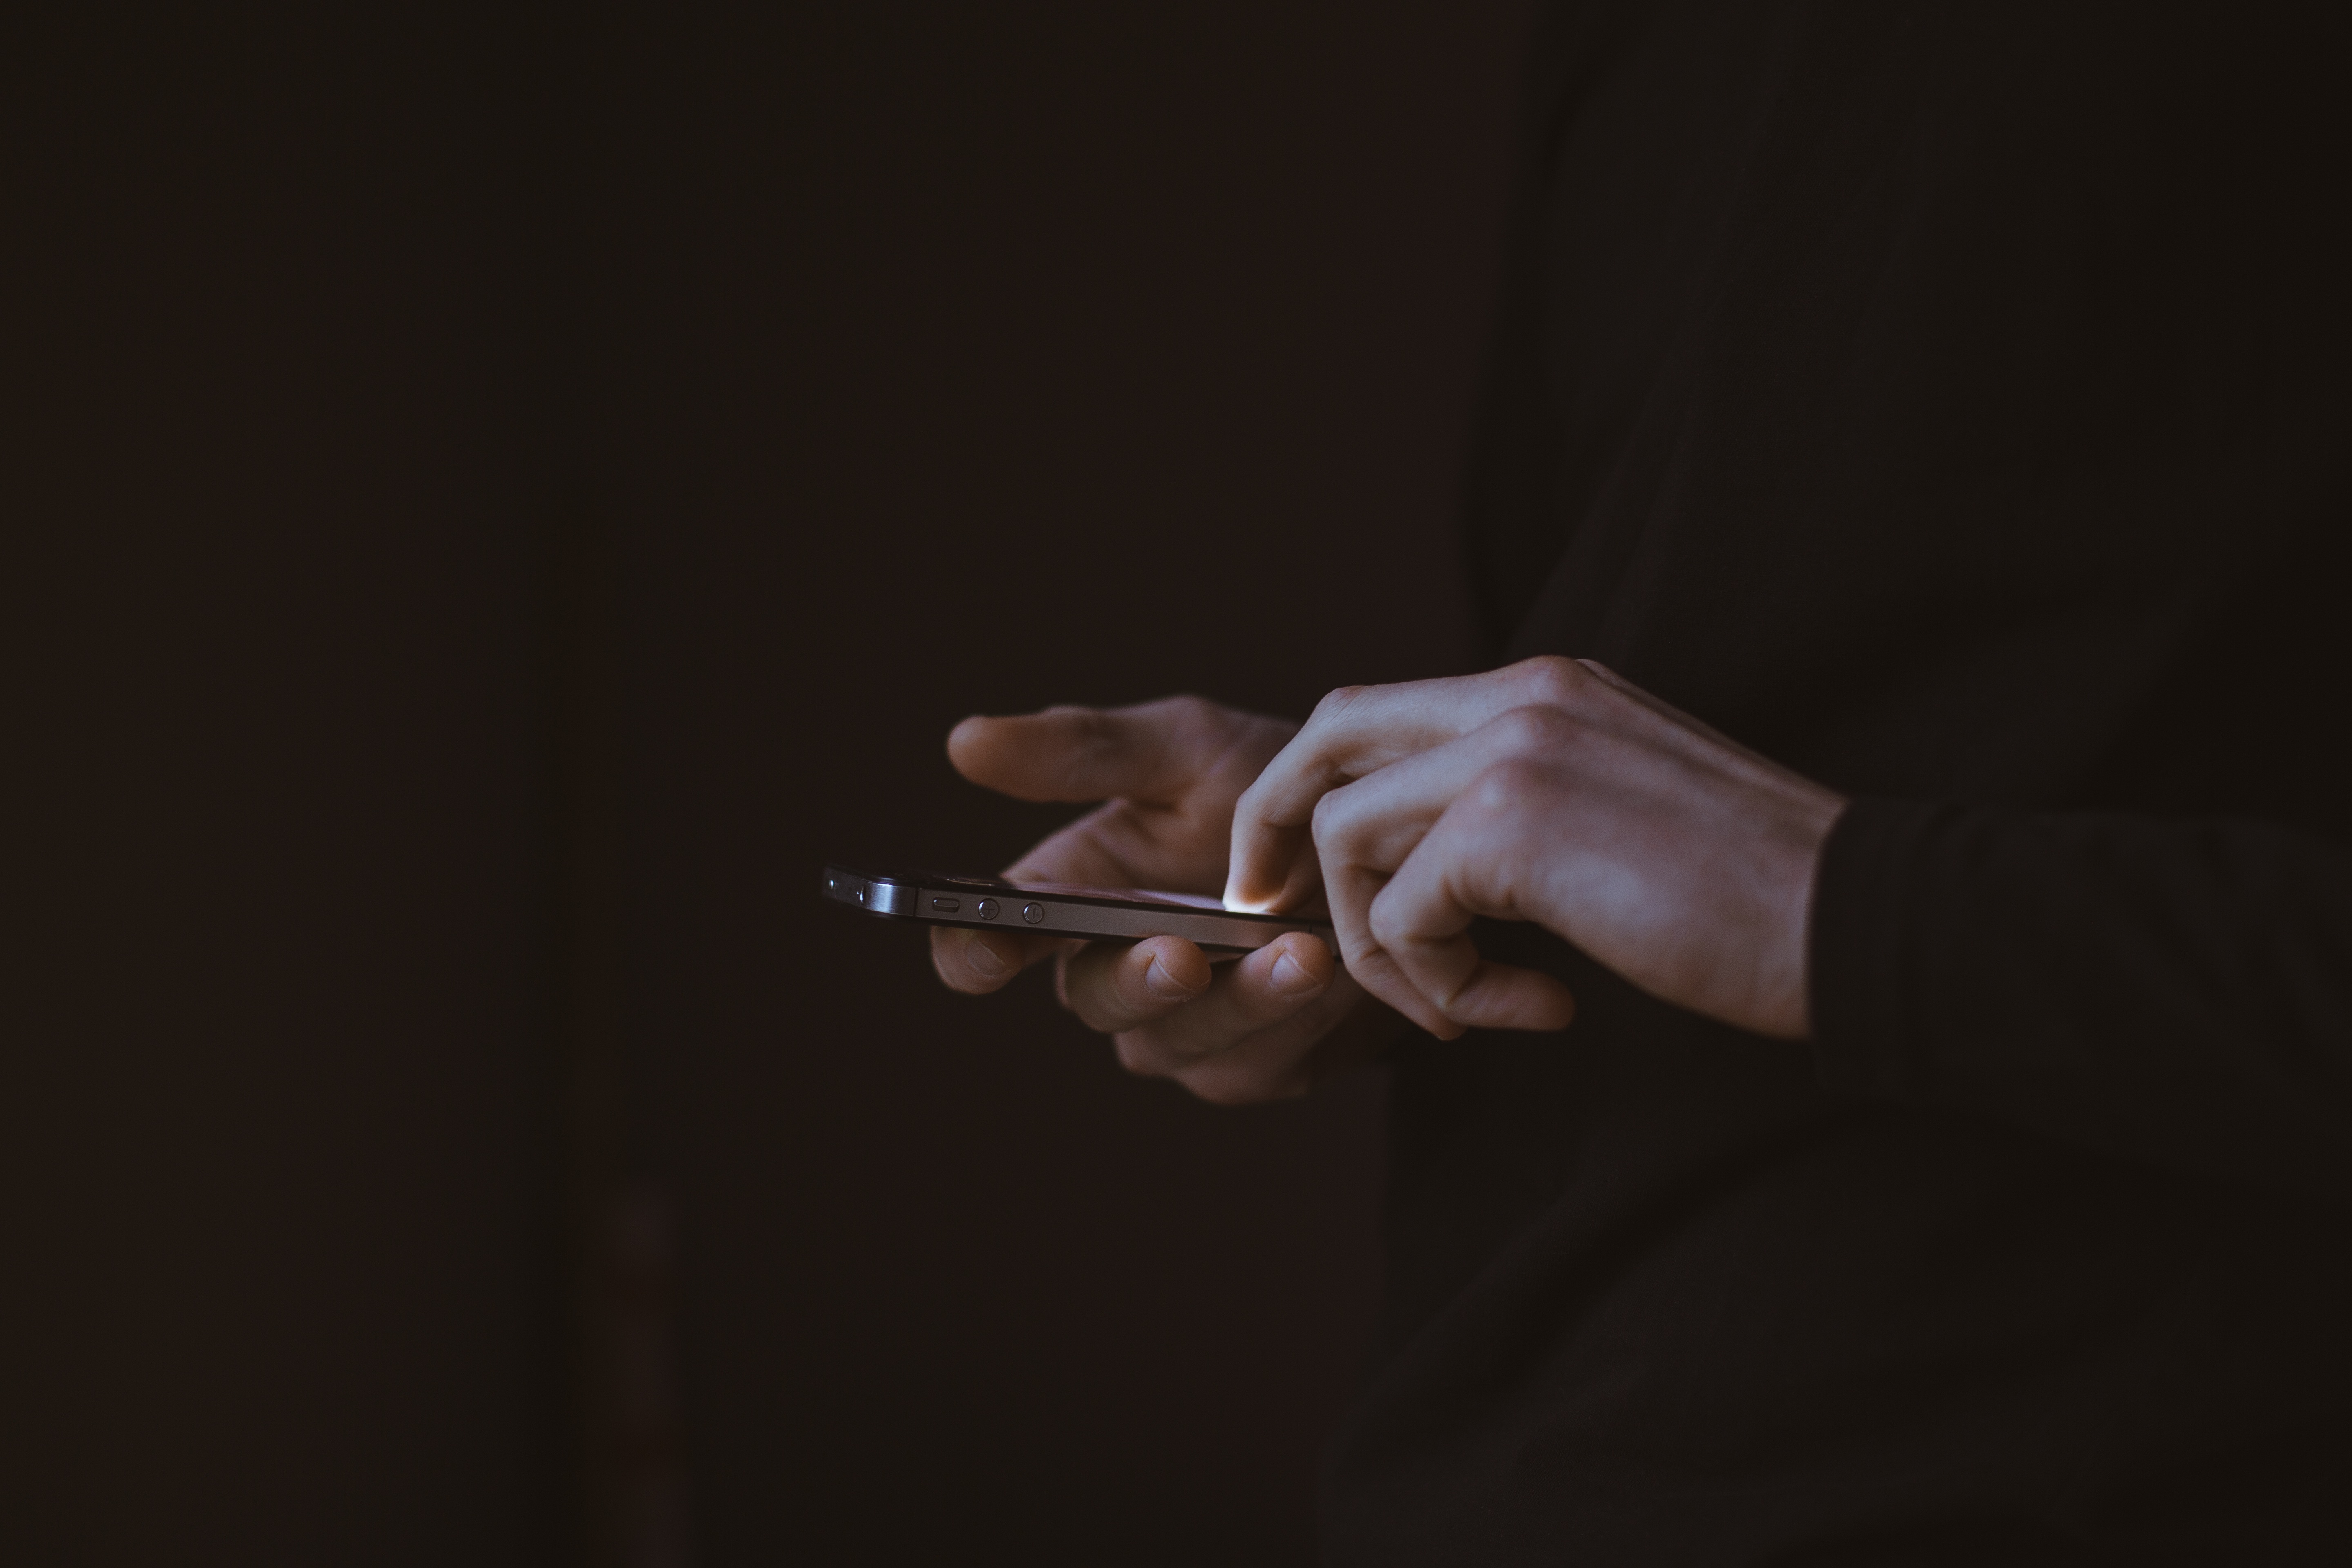 Close up of hand holding and texting on an iPhone. Focus of photo is on hands and phone against an all-black background.